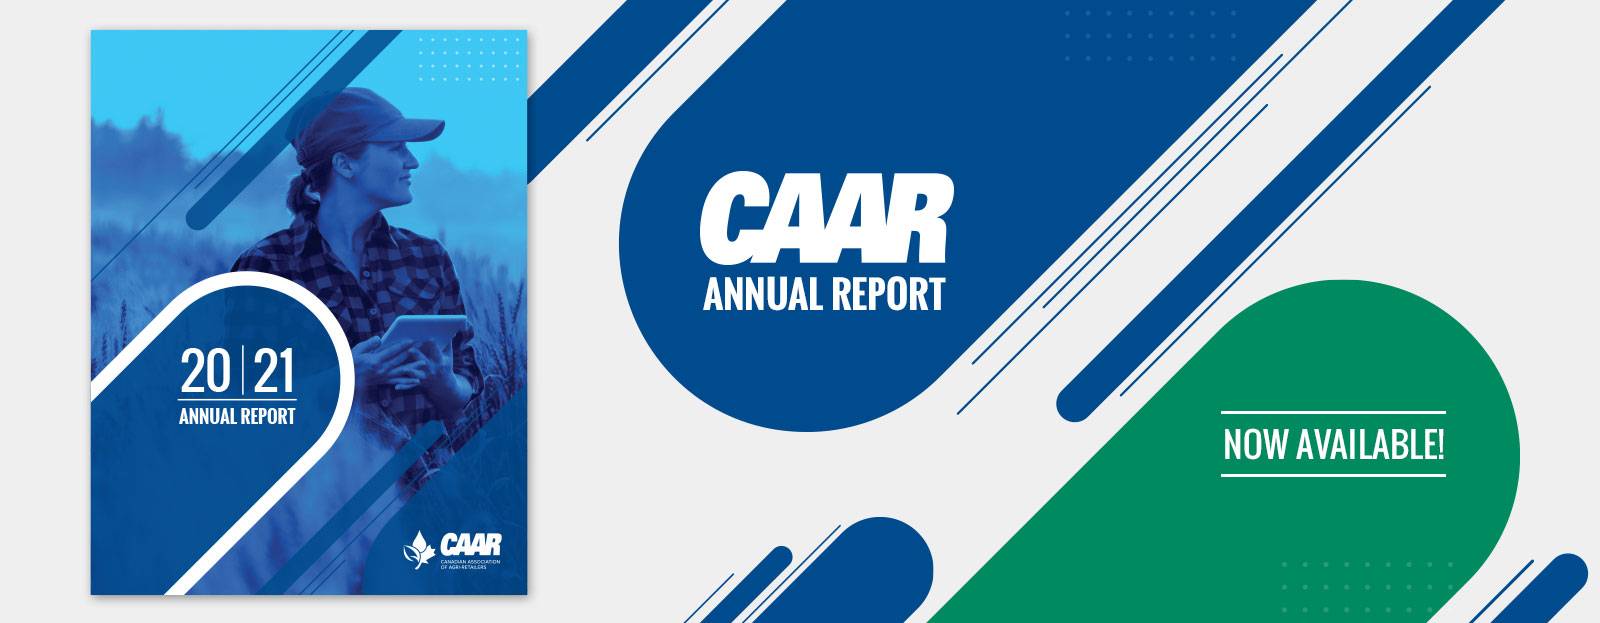 Banner for The CAAR 2021 Annual Report is now available